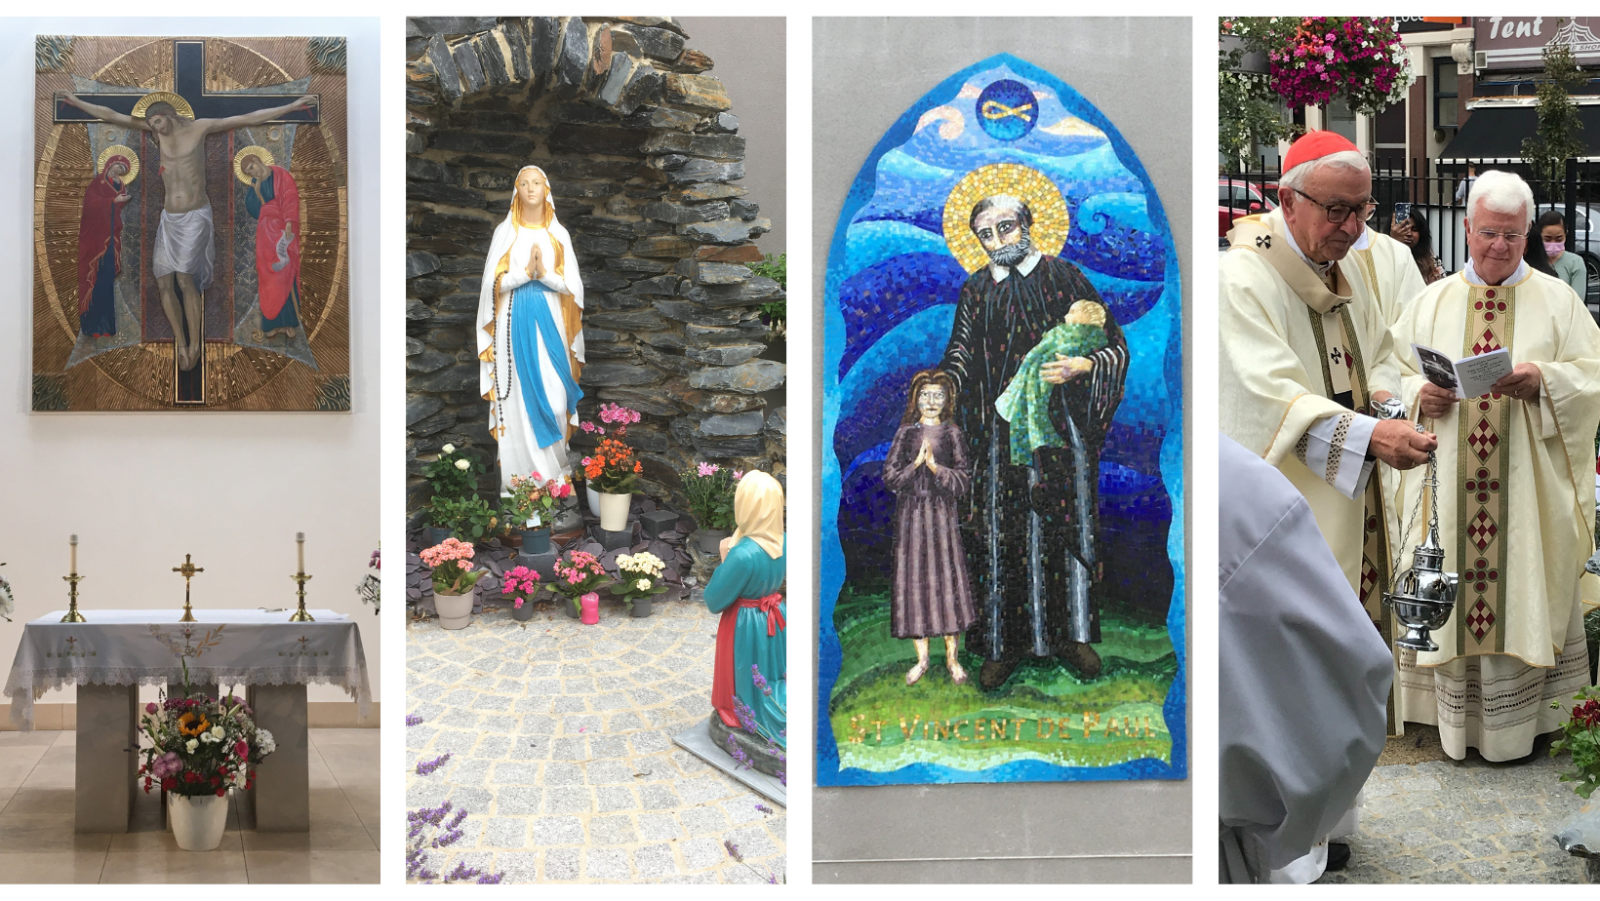 Cardinal dedicates altar and blesses artwork and grotto at Harrow Road - Diocese of Westminster